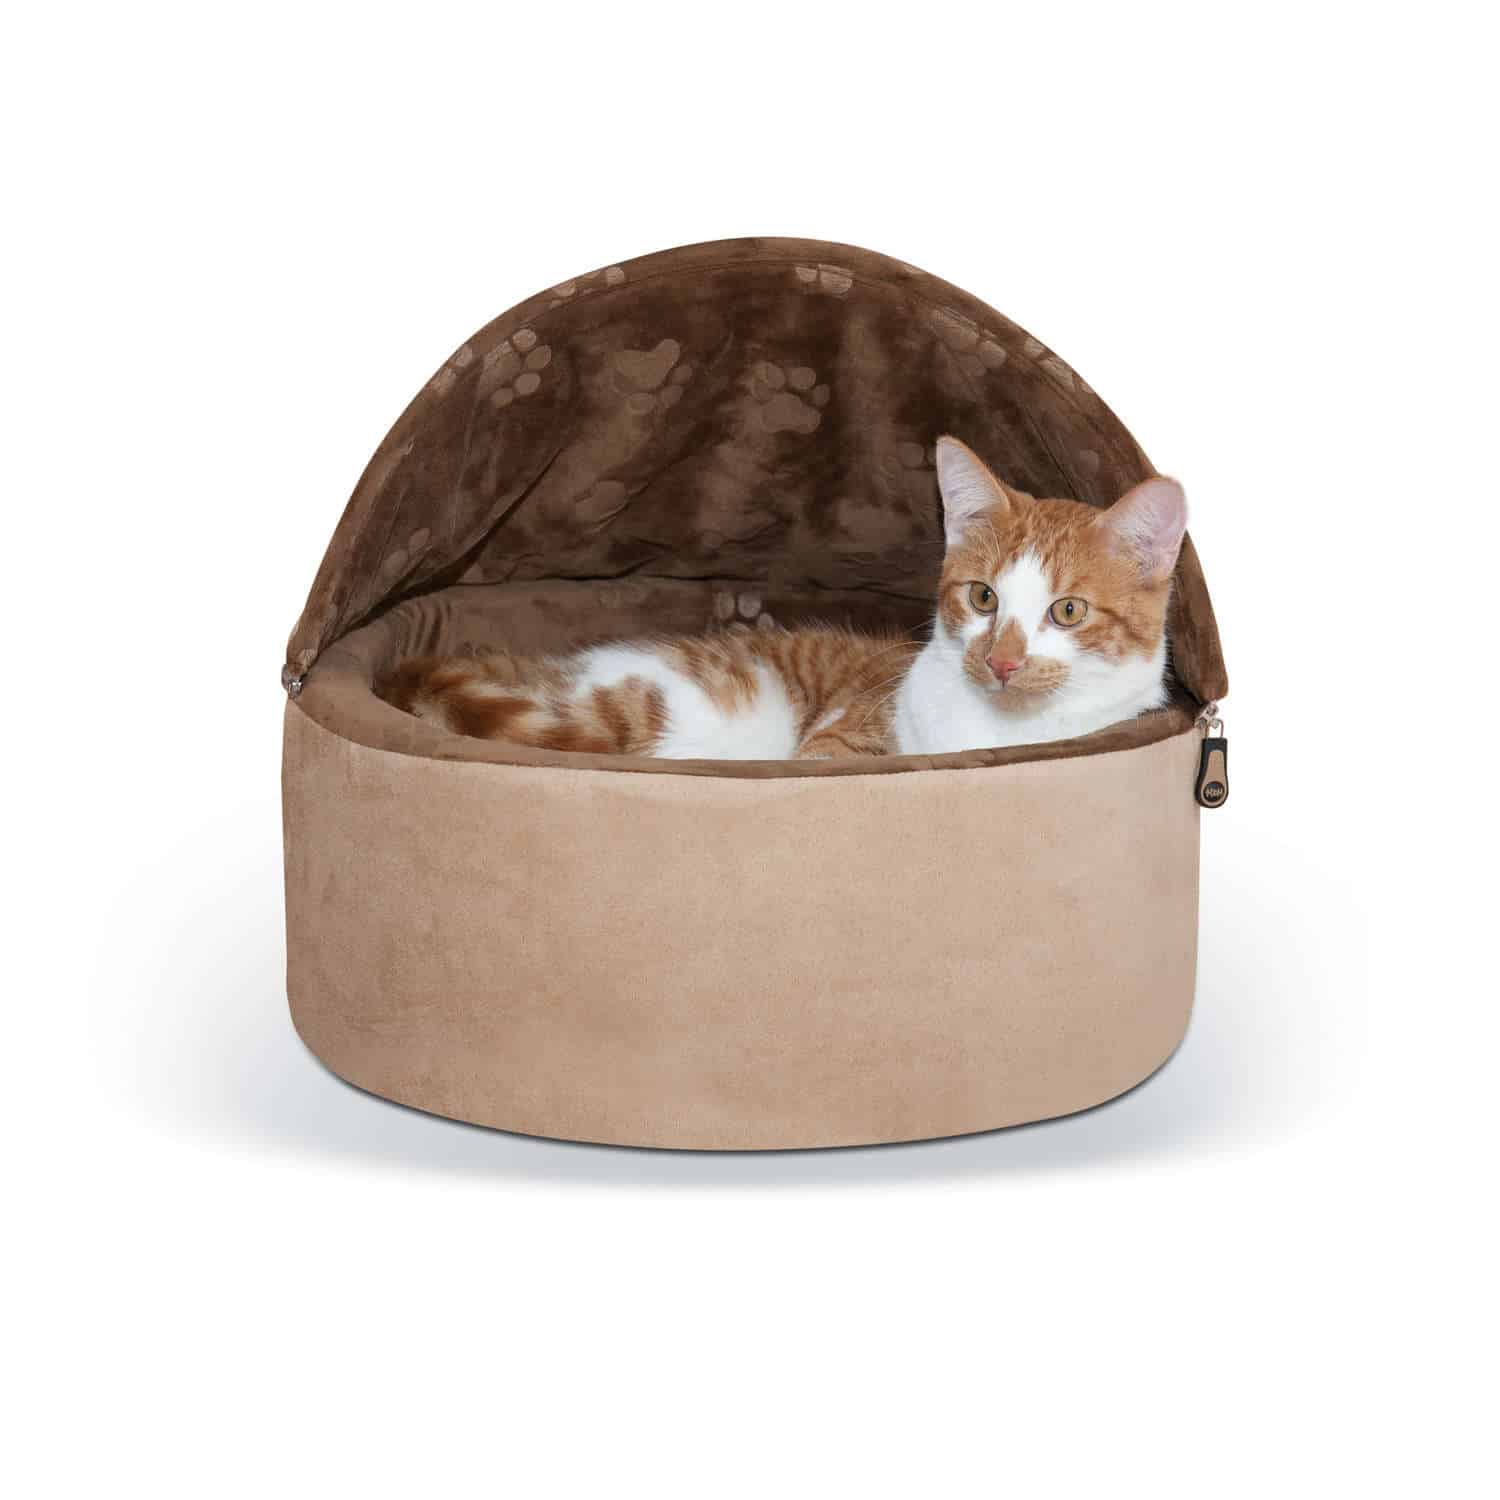 kh2995 Self-Warming Kitty Bed Hooded